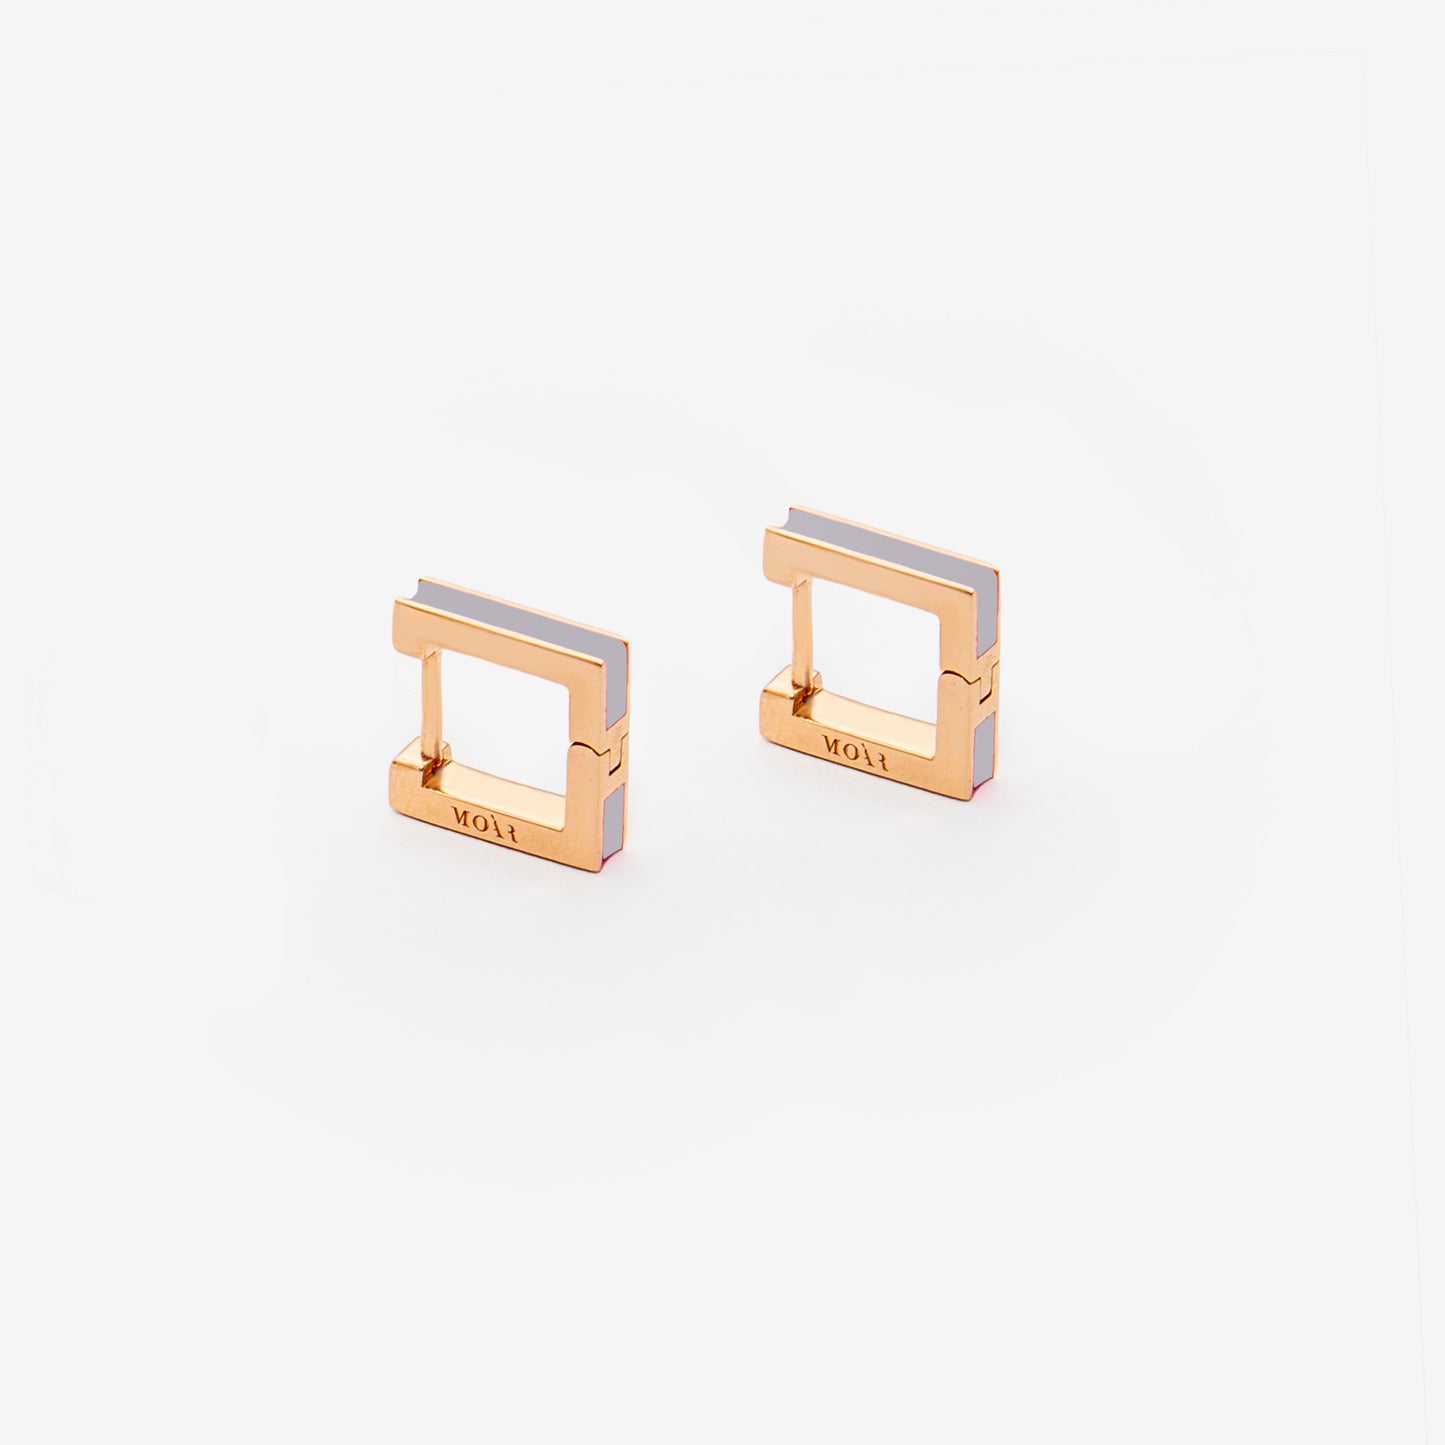 Square cool gray earrings